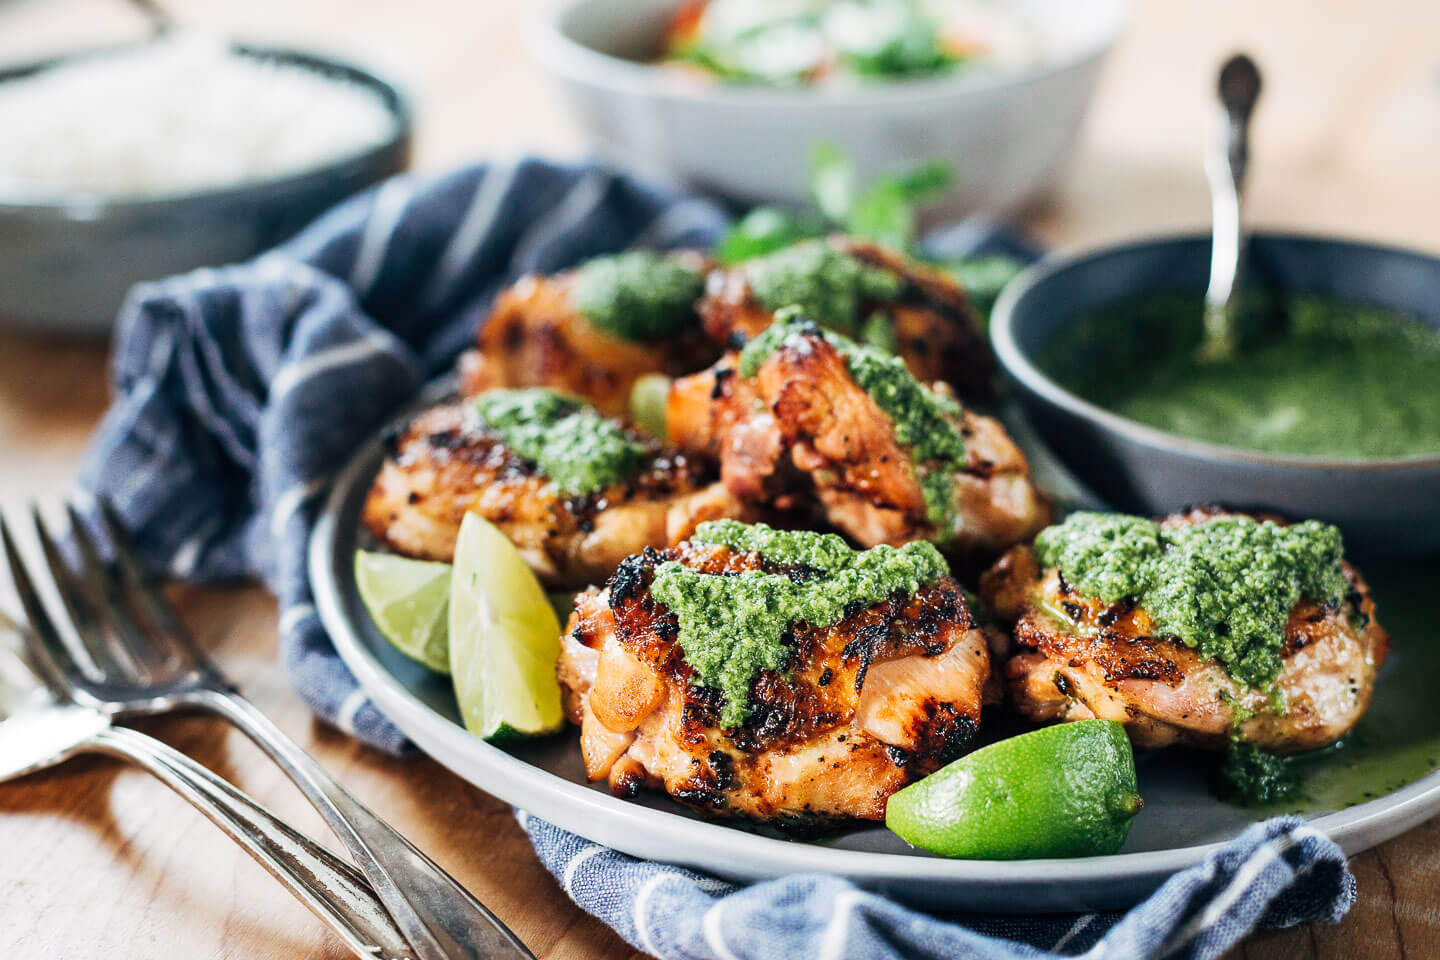 Grilled coconut lime chicken thighs come off the grill with crispy, caramelized skin and just the right amount of tang, sweetness, and spicy heat.